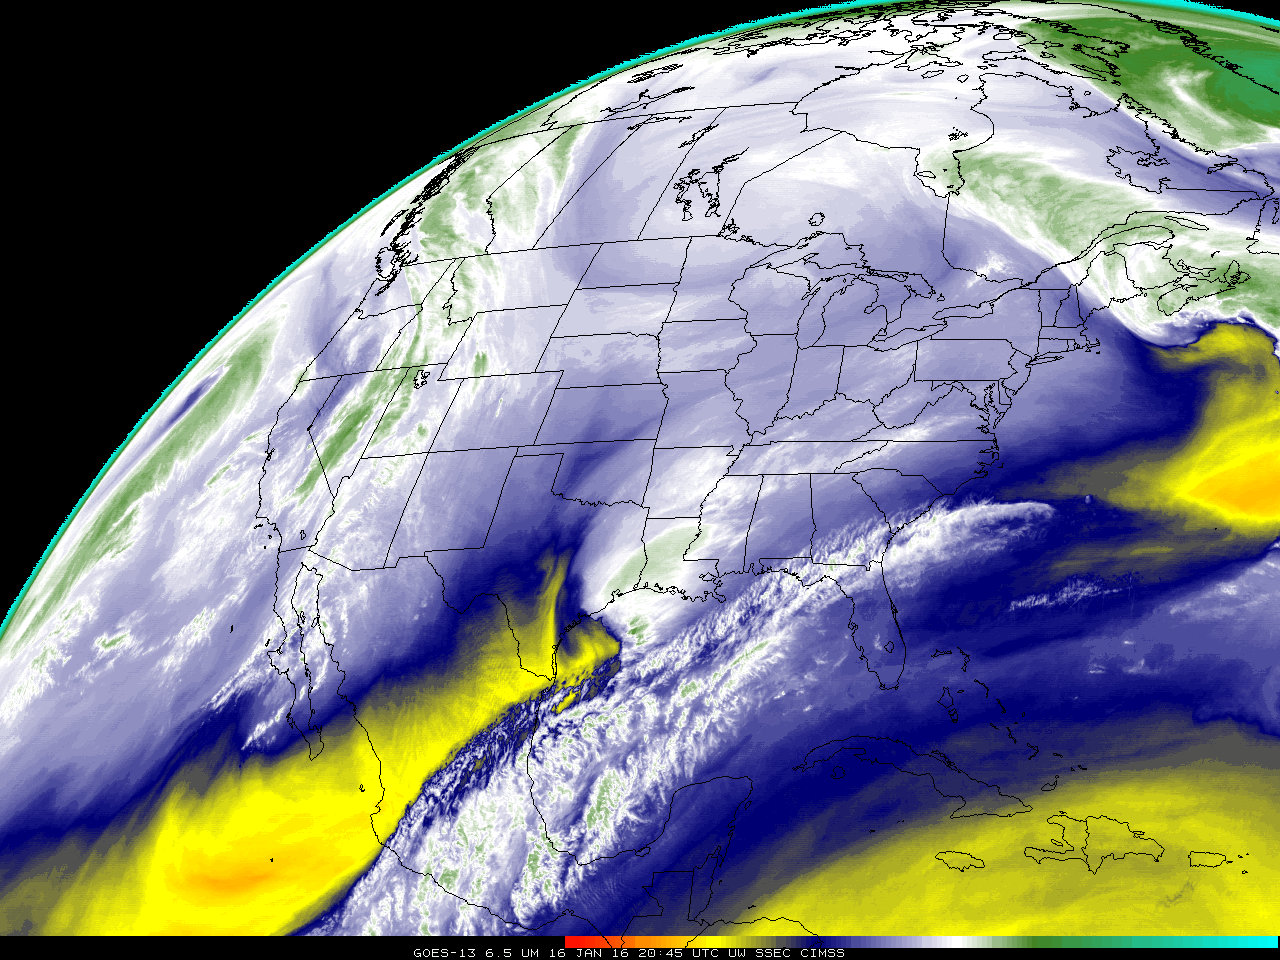 GOES-13 Water Vapor Infrared (6.5 µm) images [click to play animation]